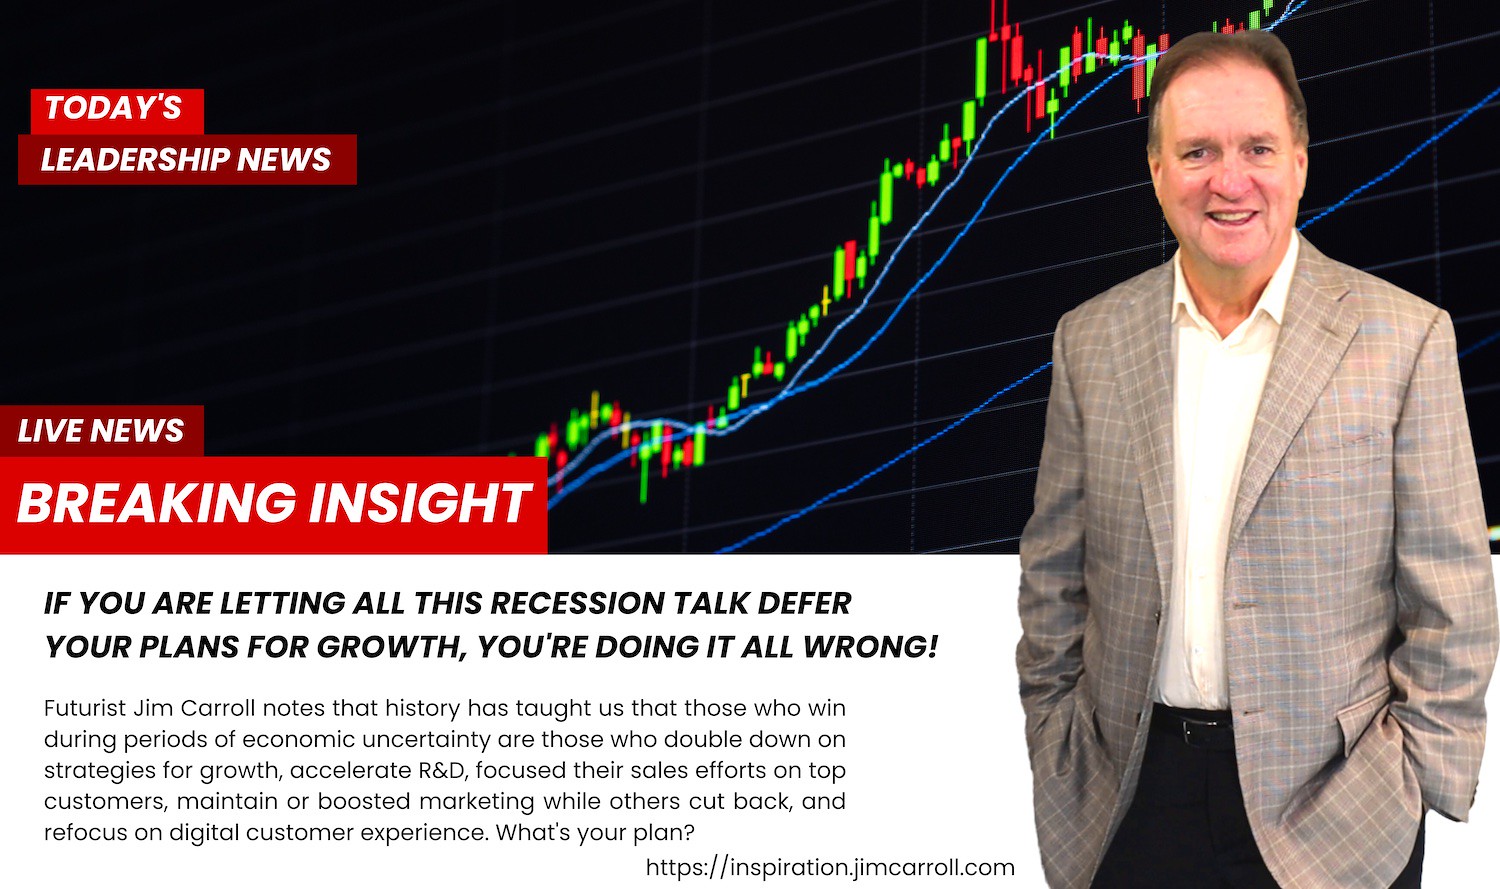 "If you are letting all this recession talk defer your plans for growth, you're doing it all wrong!" - Futurist Jim Carroll